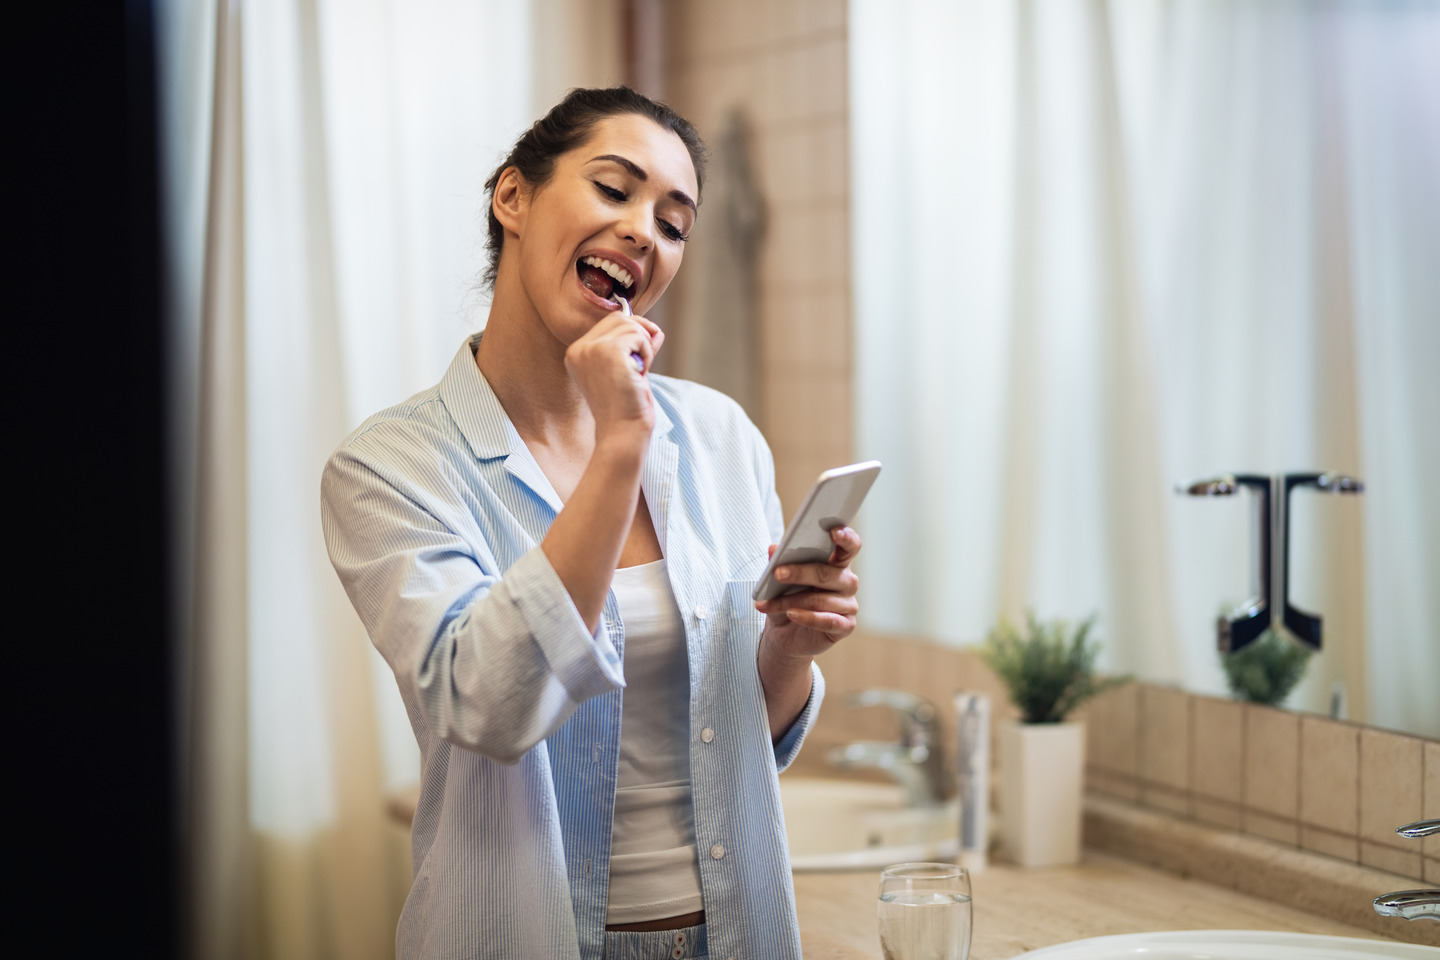 IoT devices include smart toothbrushes and smart fridges.